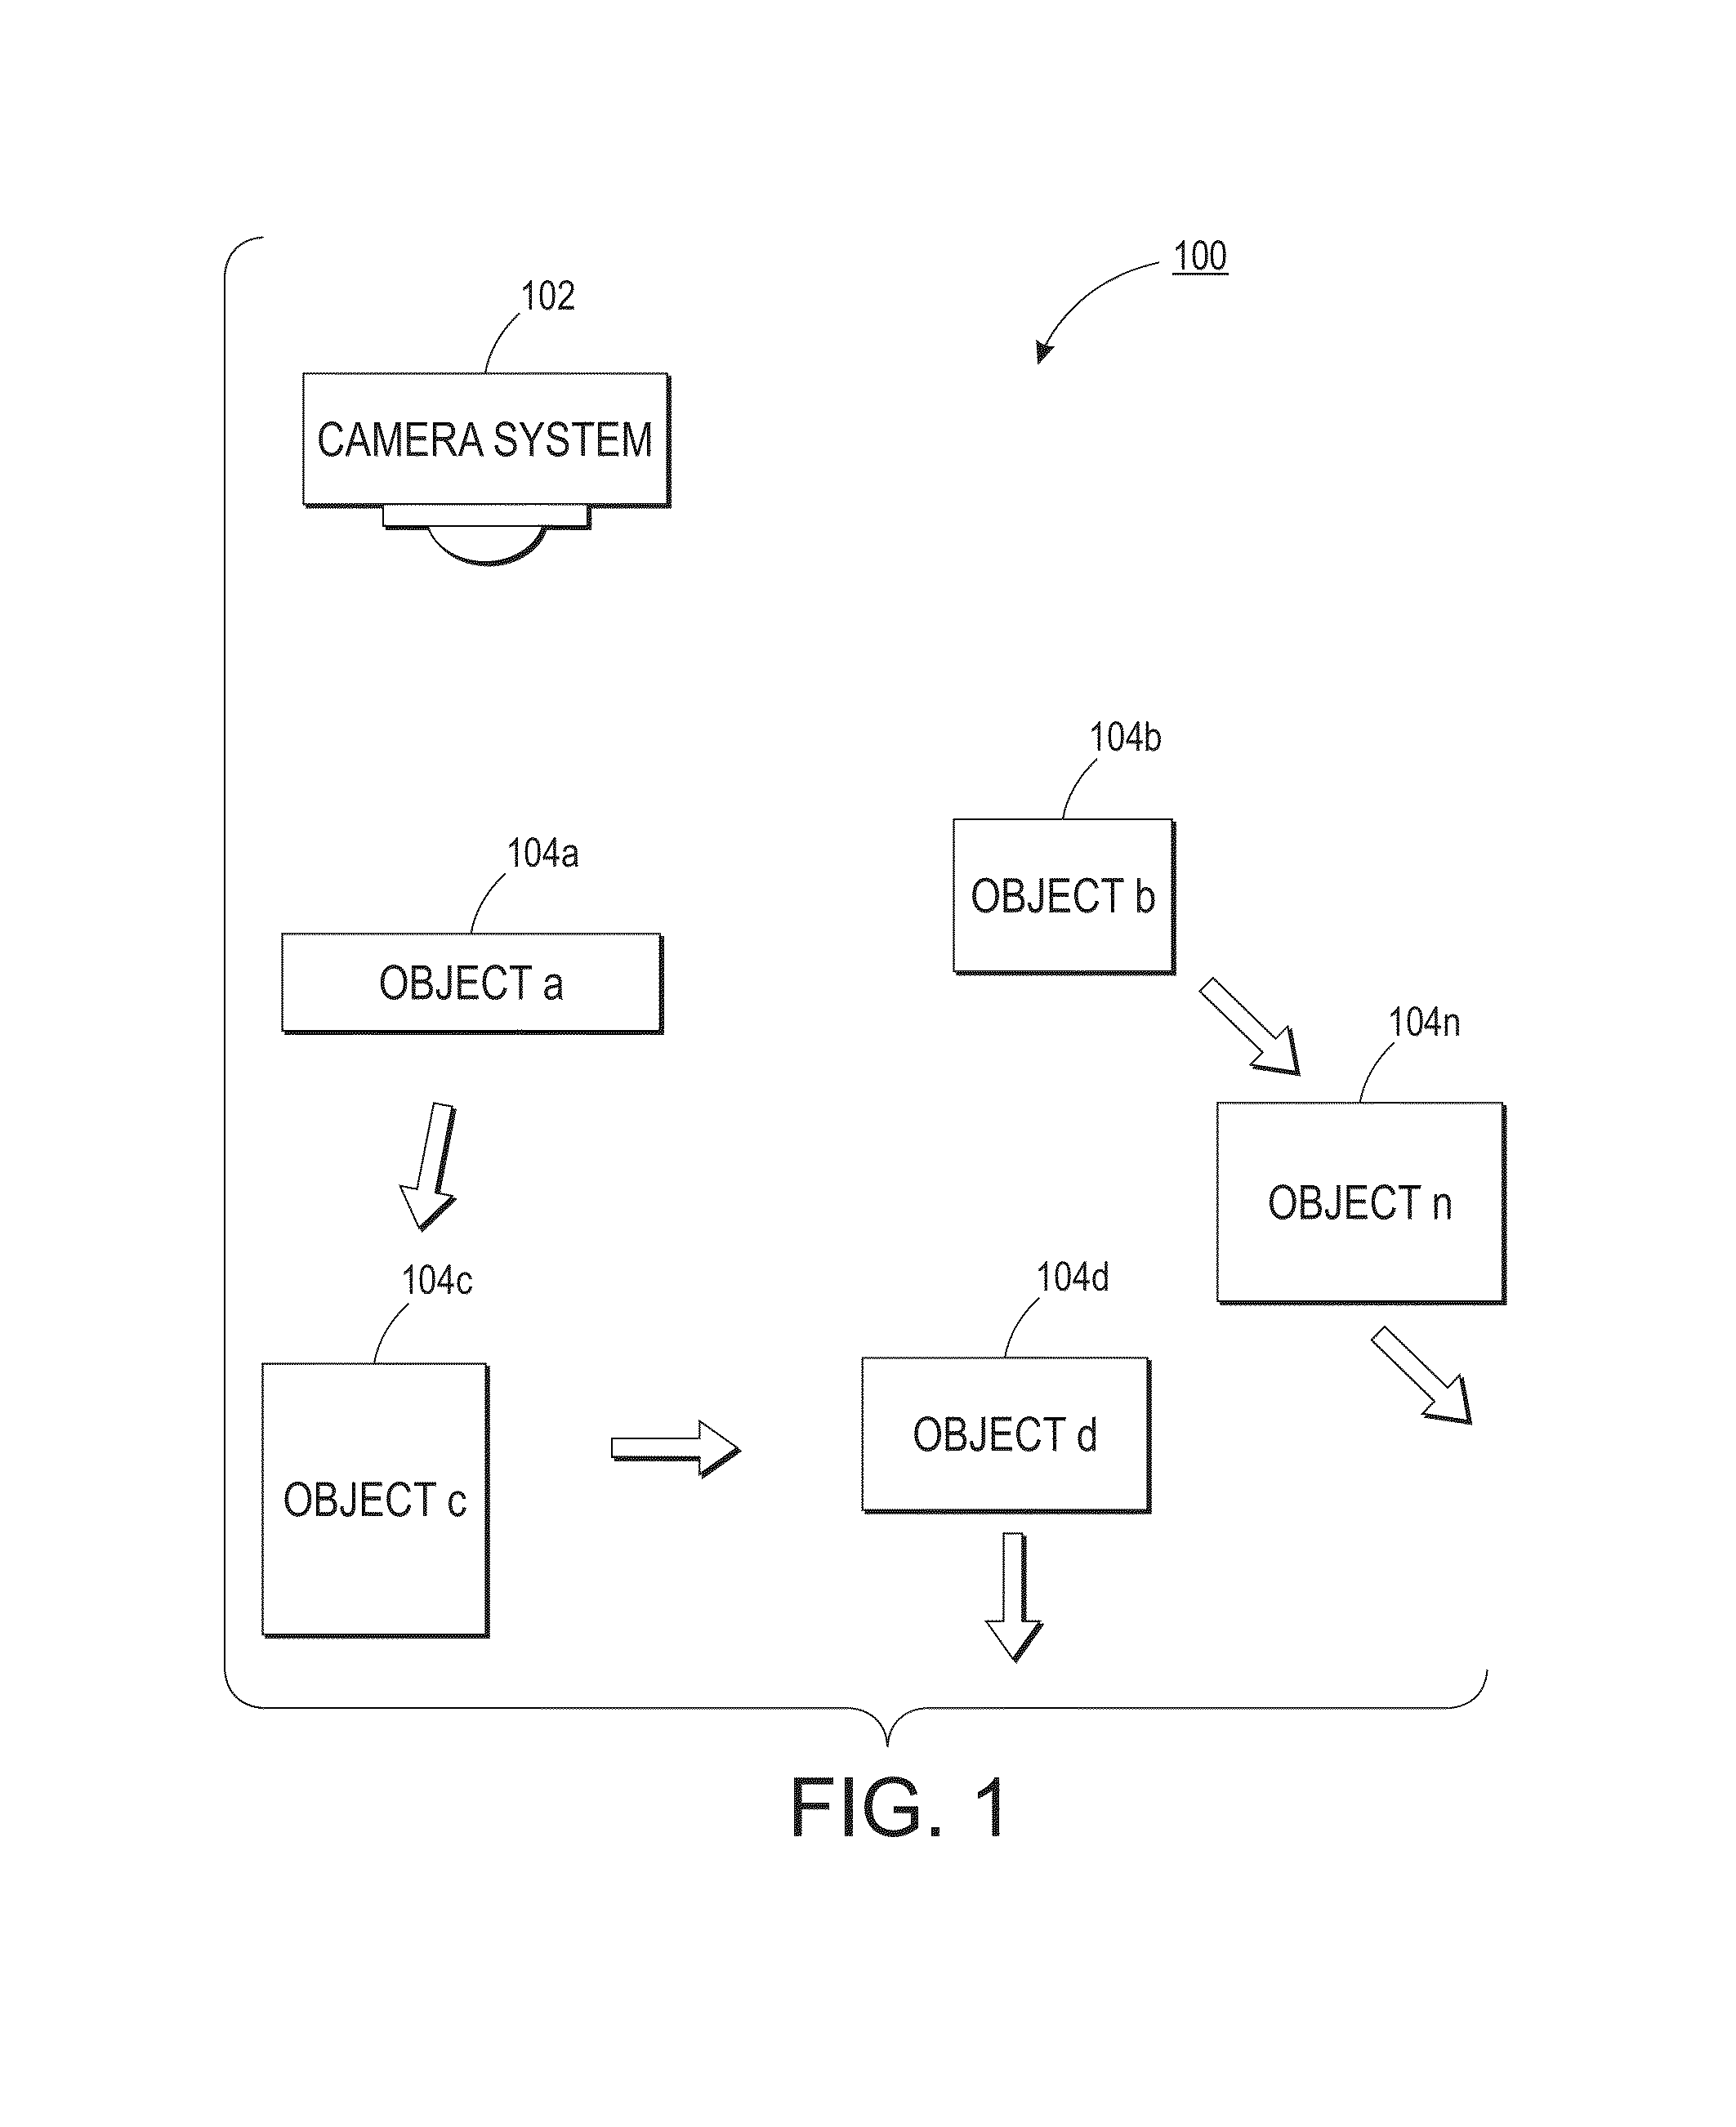 System and method for detecting, tracking and estimating the speed of vehicles from a mobile platform